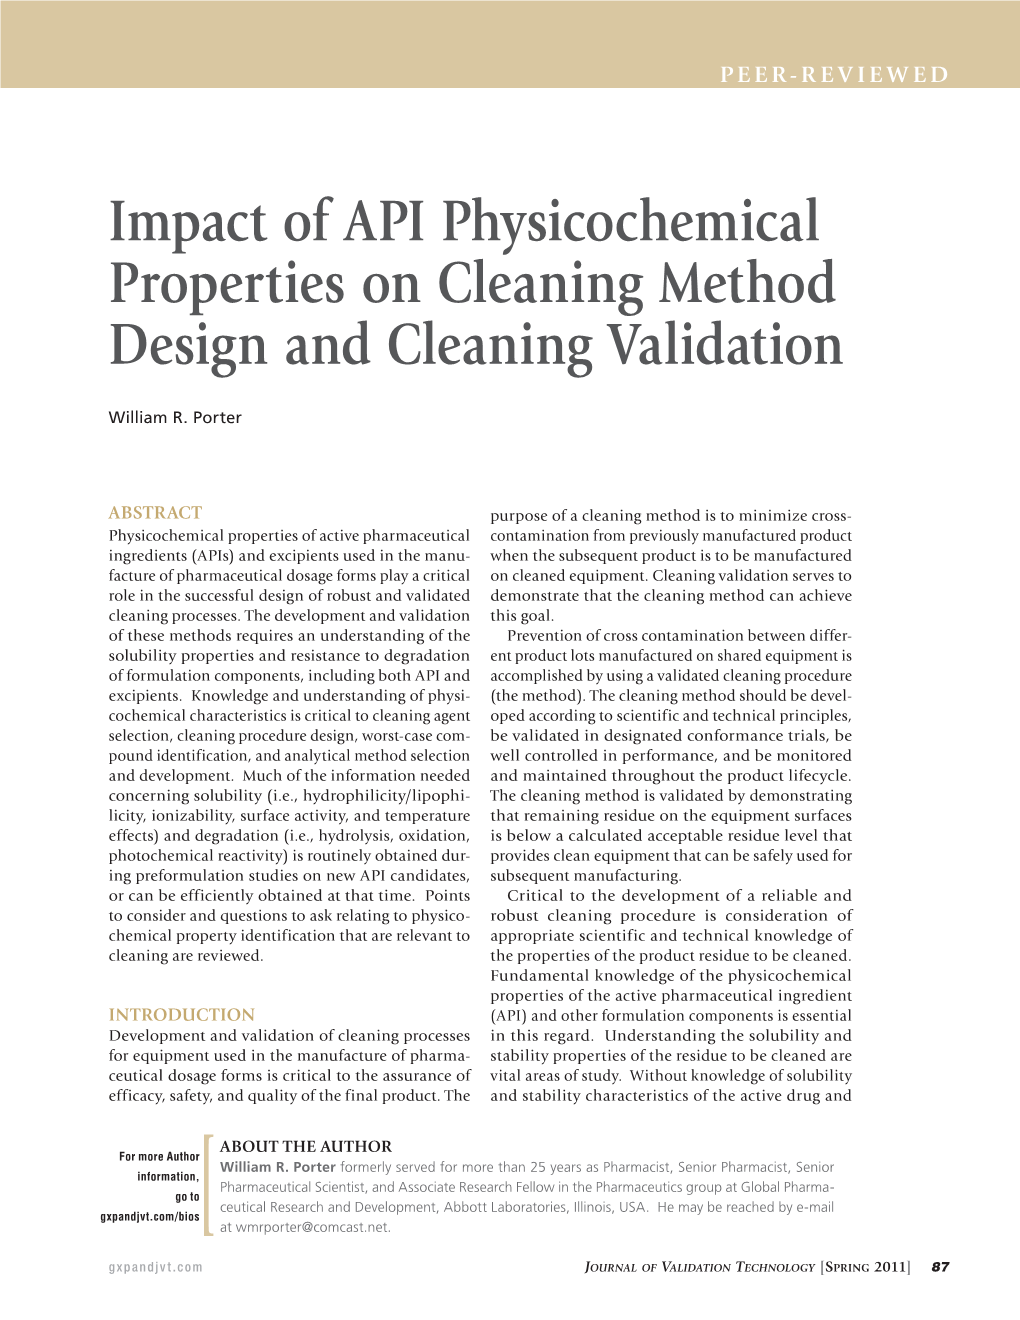 Impact of API Physicochemical Properties on Cleaning Method Design and Cleaning Validation